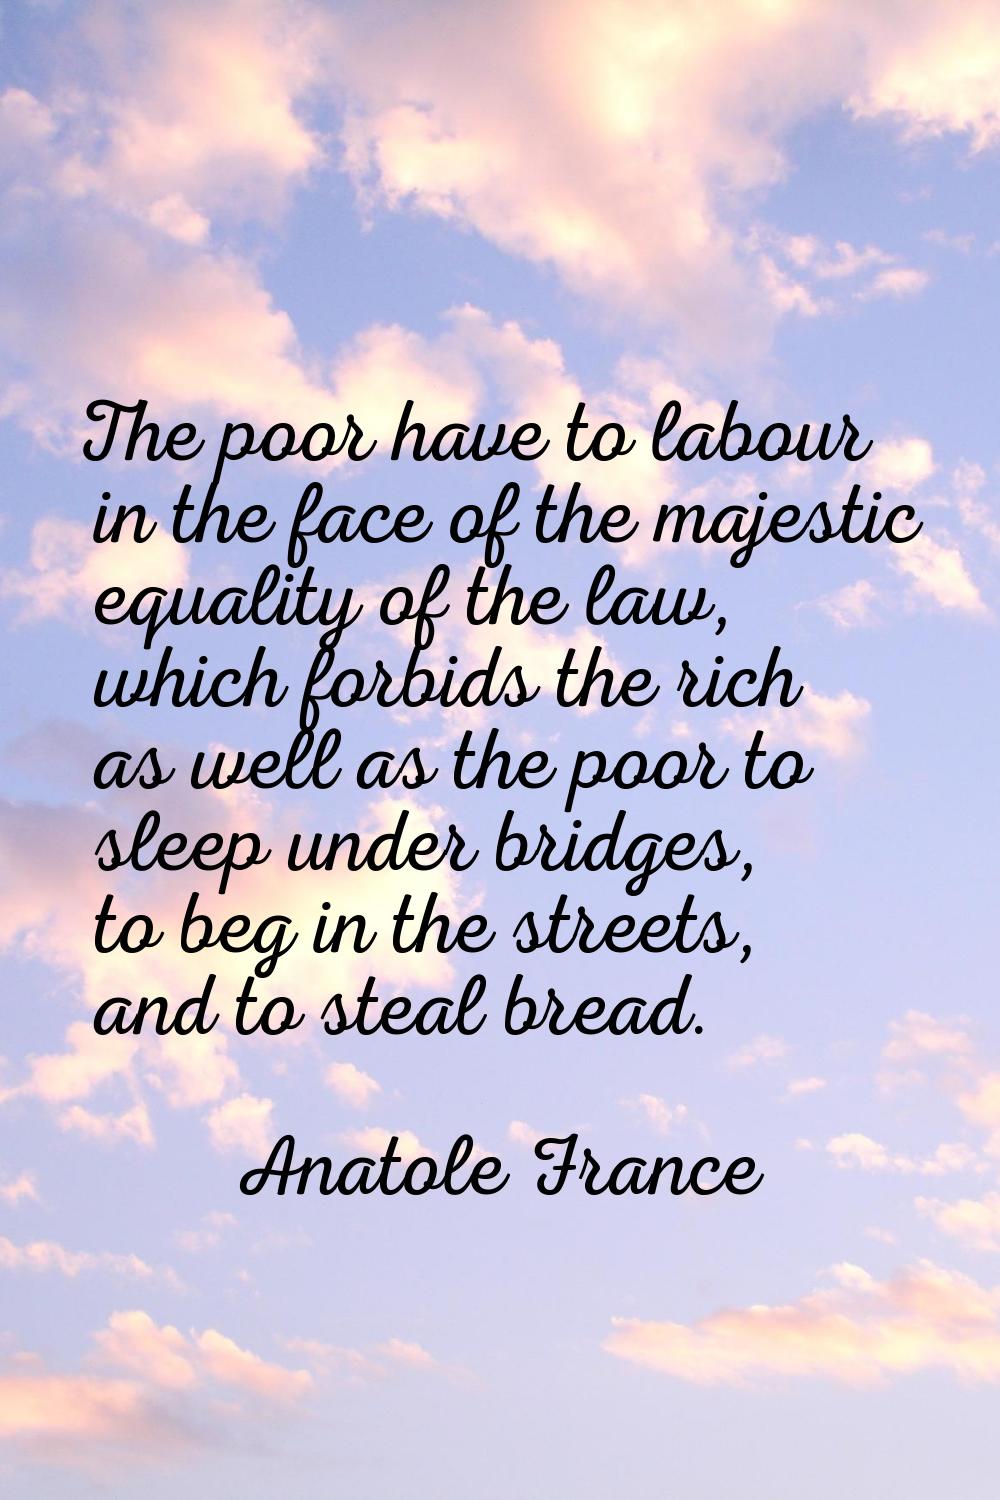 The poor have to labour in the face of the majestic equality of the law, which forbids the rich as 